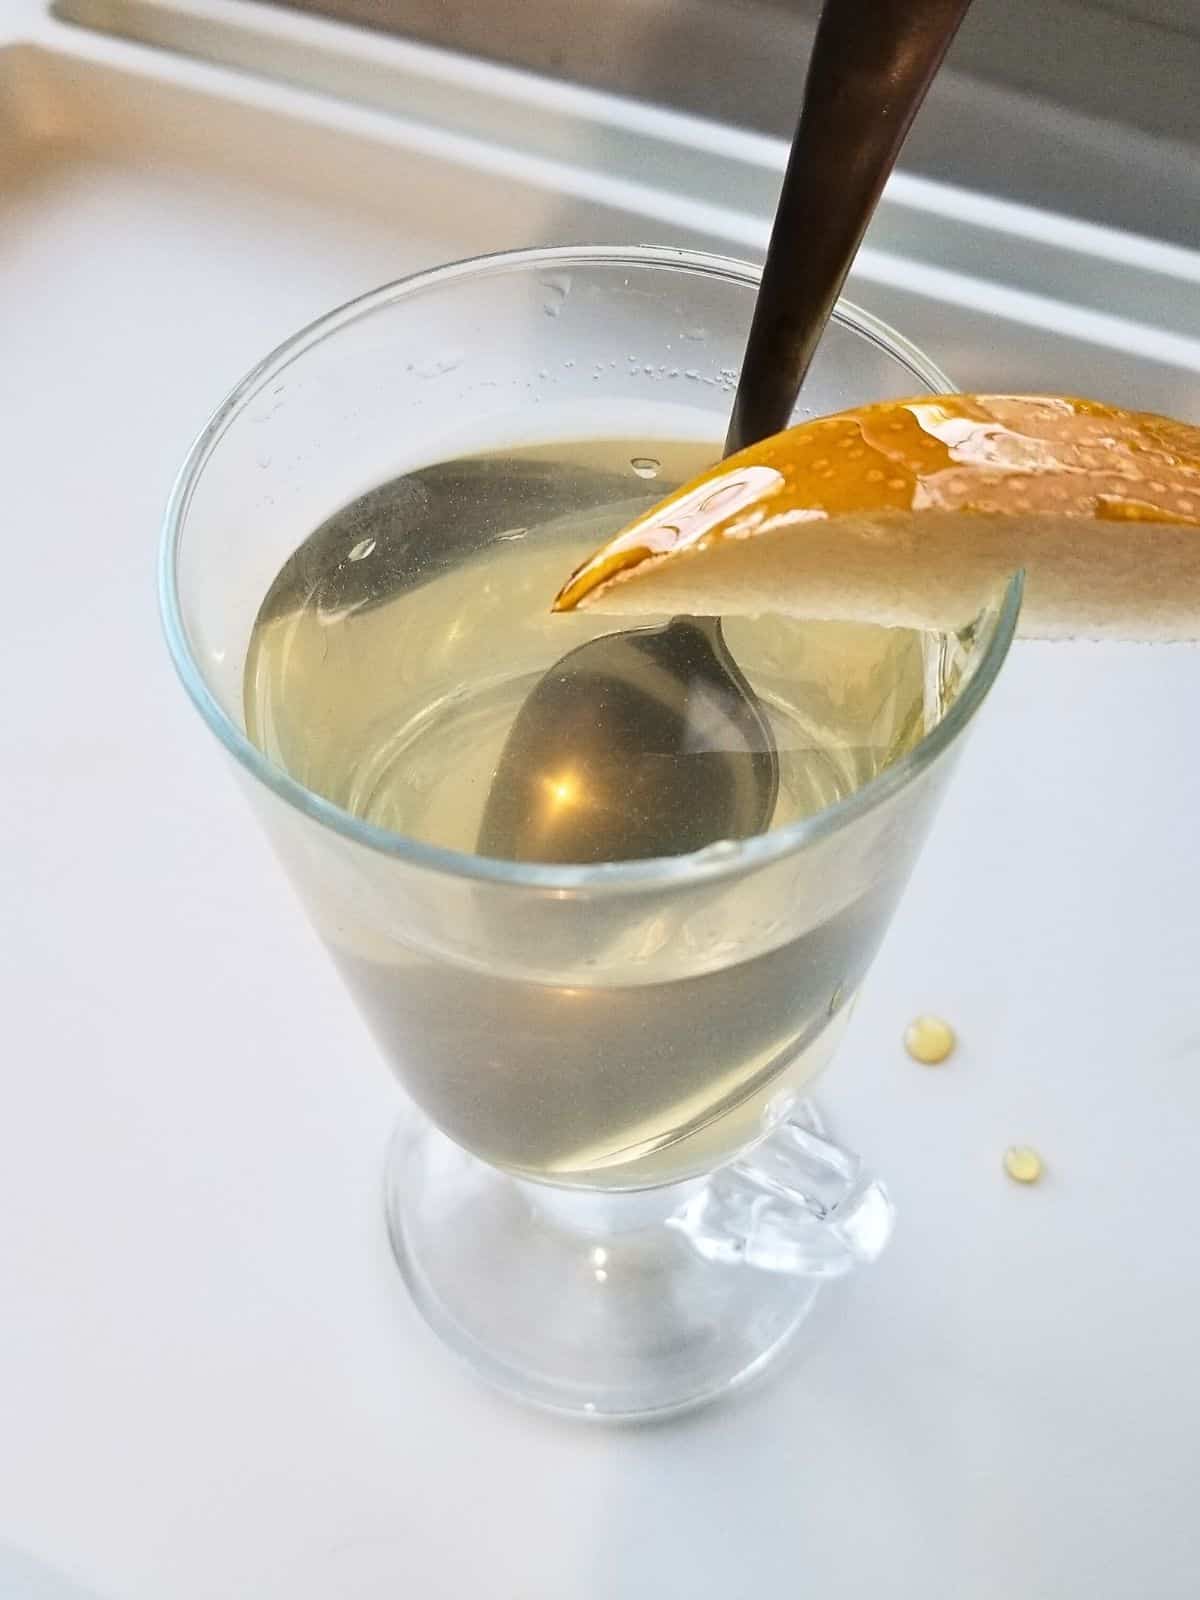 Asian pear tea, topped with a slice of pear, in a glass.